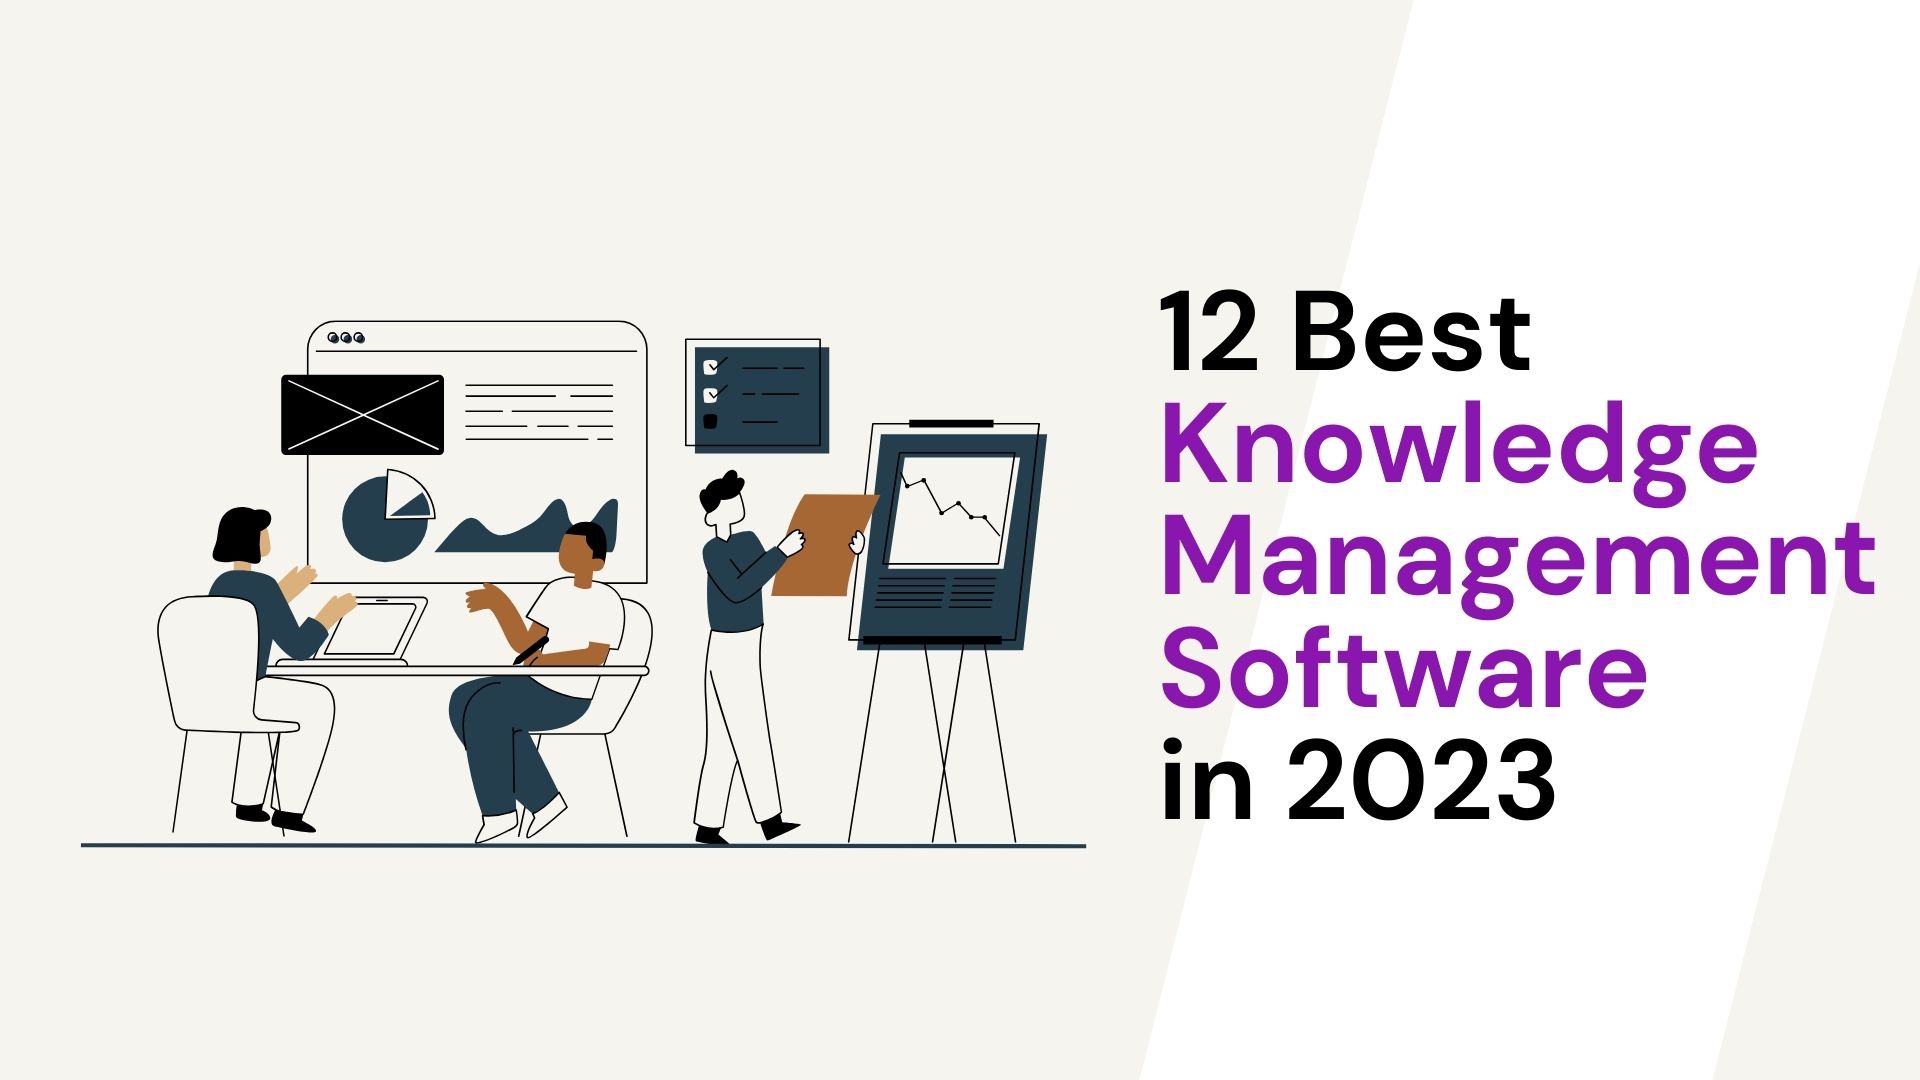 12 Best Knowledge Management Software in 2023